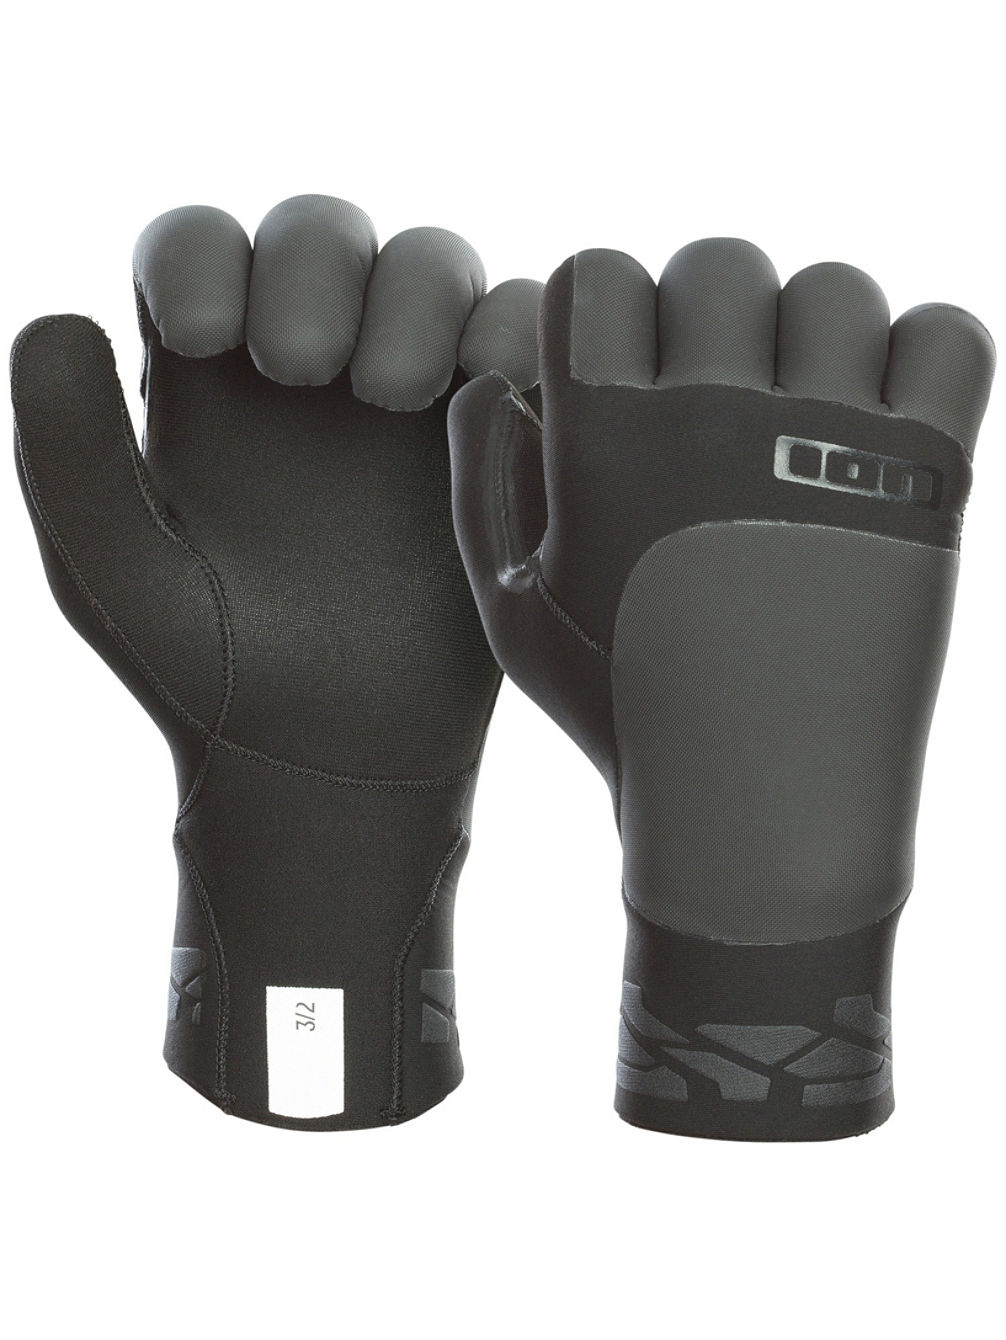 Claw 3/2 Neoprene Guantes